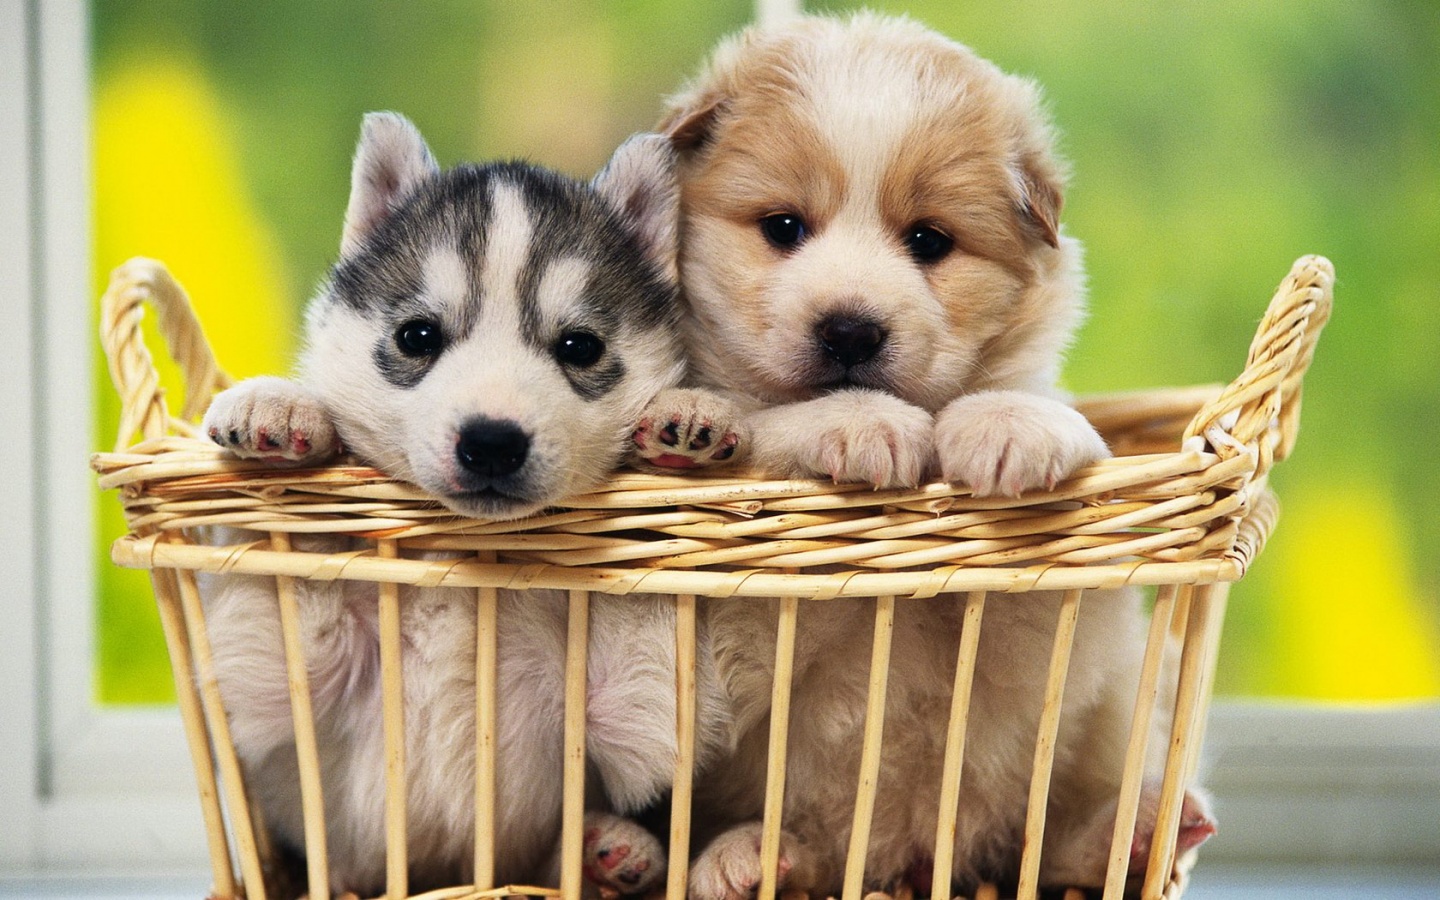  Dogs HD Wallpapers Cute Dogs Wallpapers HD Cute Dogs Wallpapers 1440x900